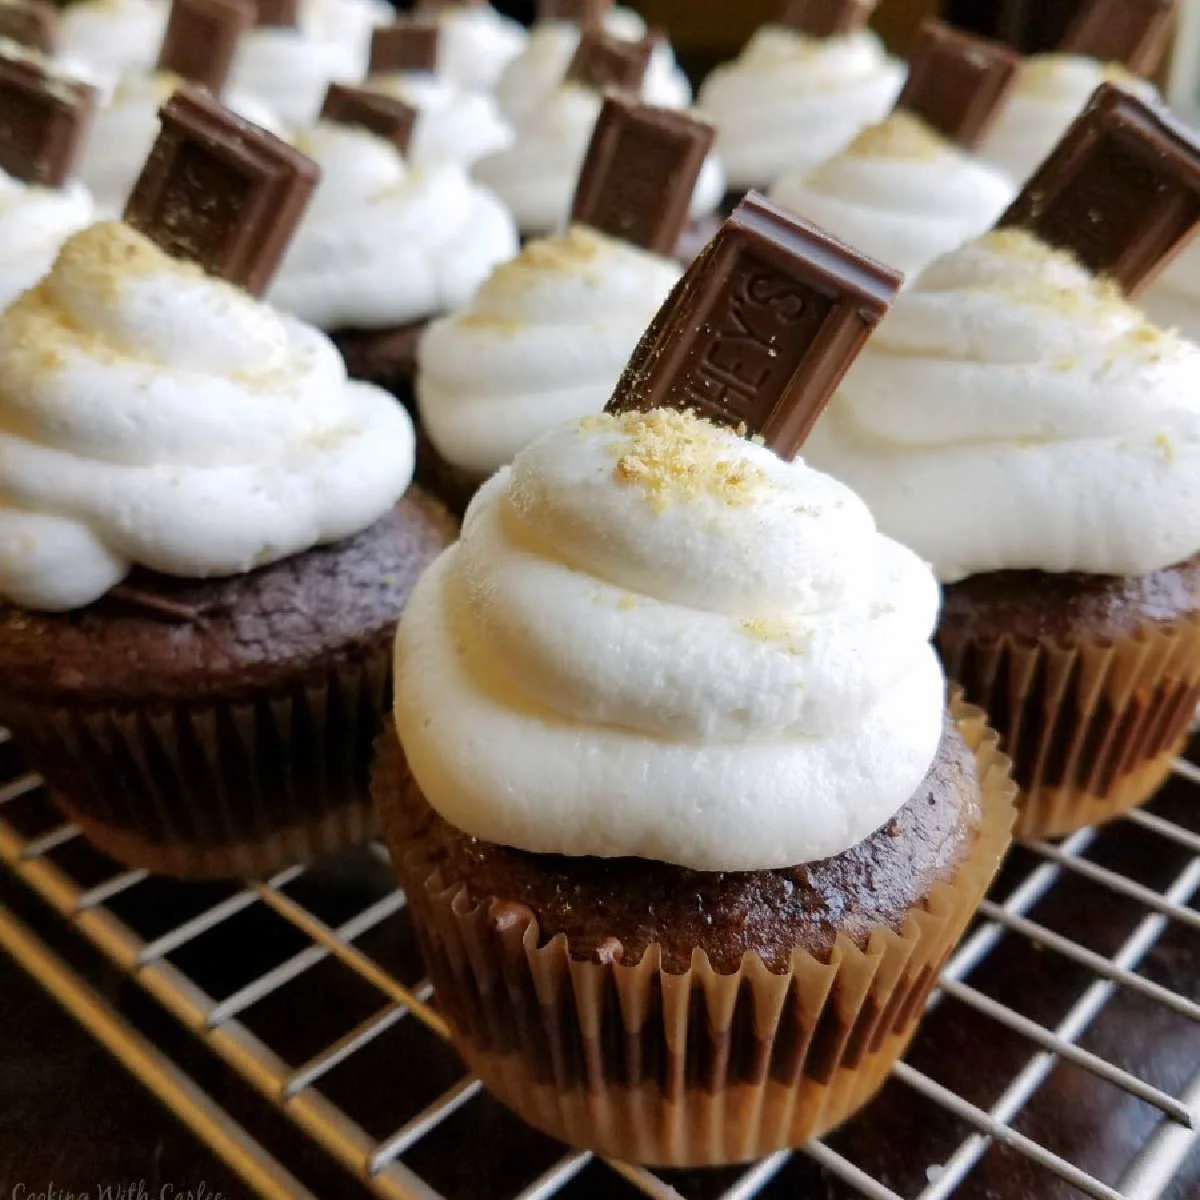 S'mores cupcakes with graham cracker crust, chocolate cupcakes and toasted marshmallow buttercream on top.